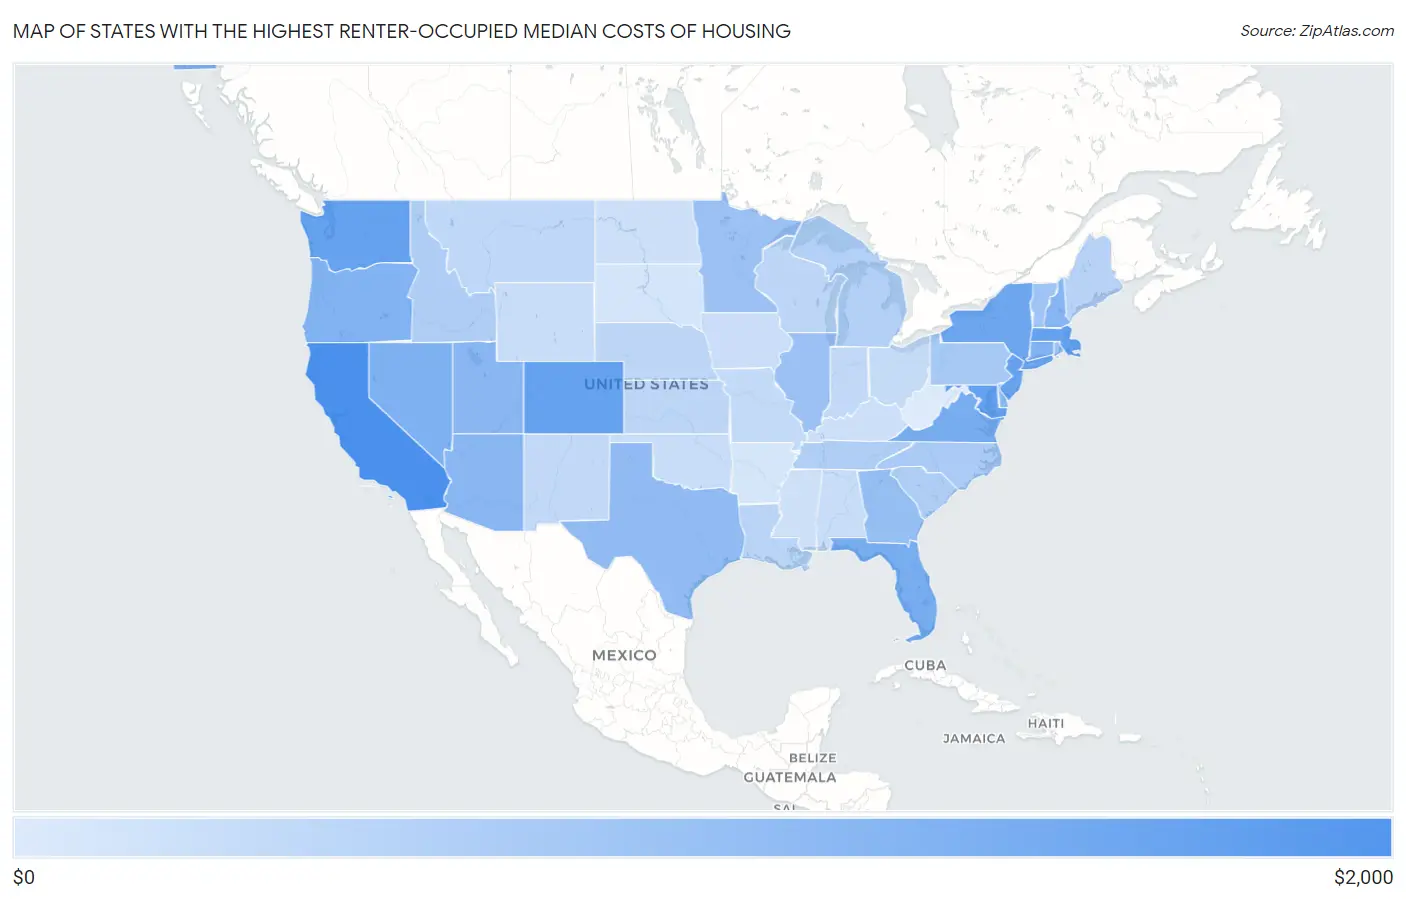 States with the Highest Renter-Occupied Median Costs of Housing in the United States Map